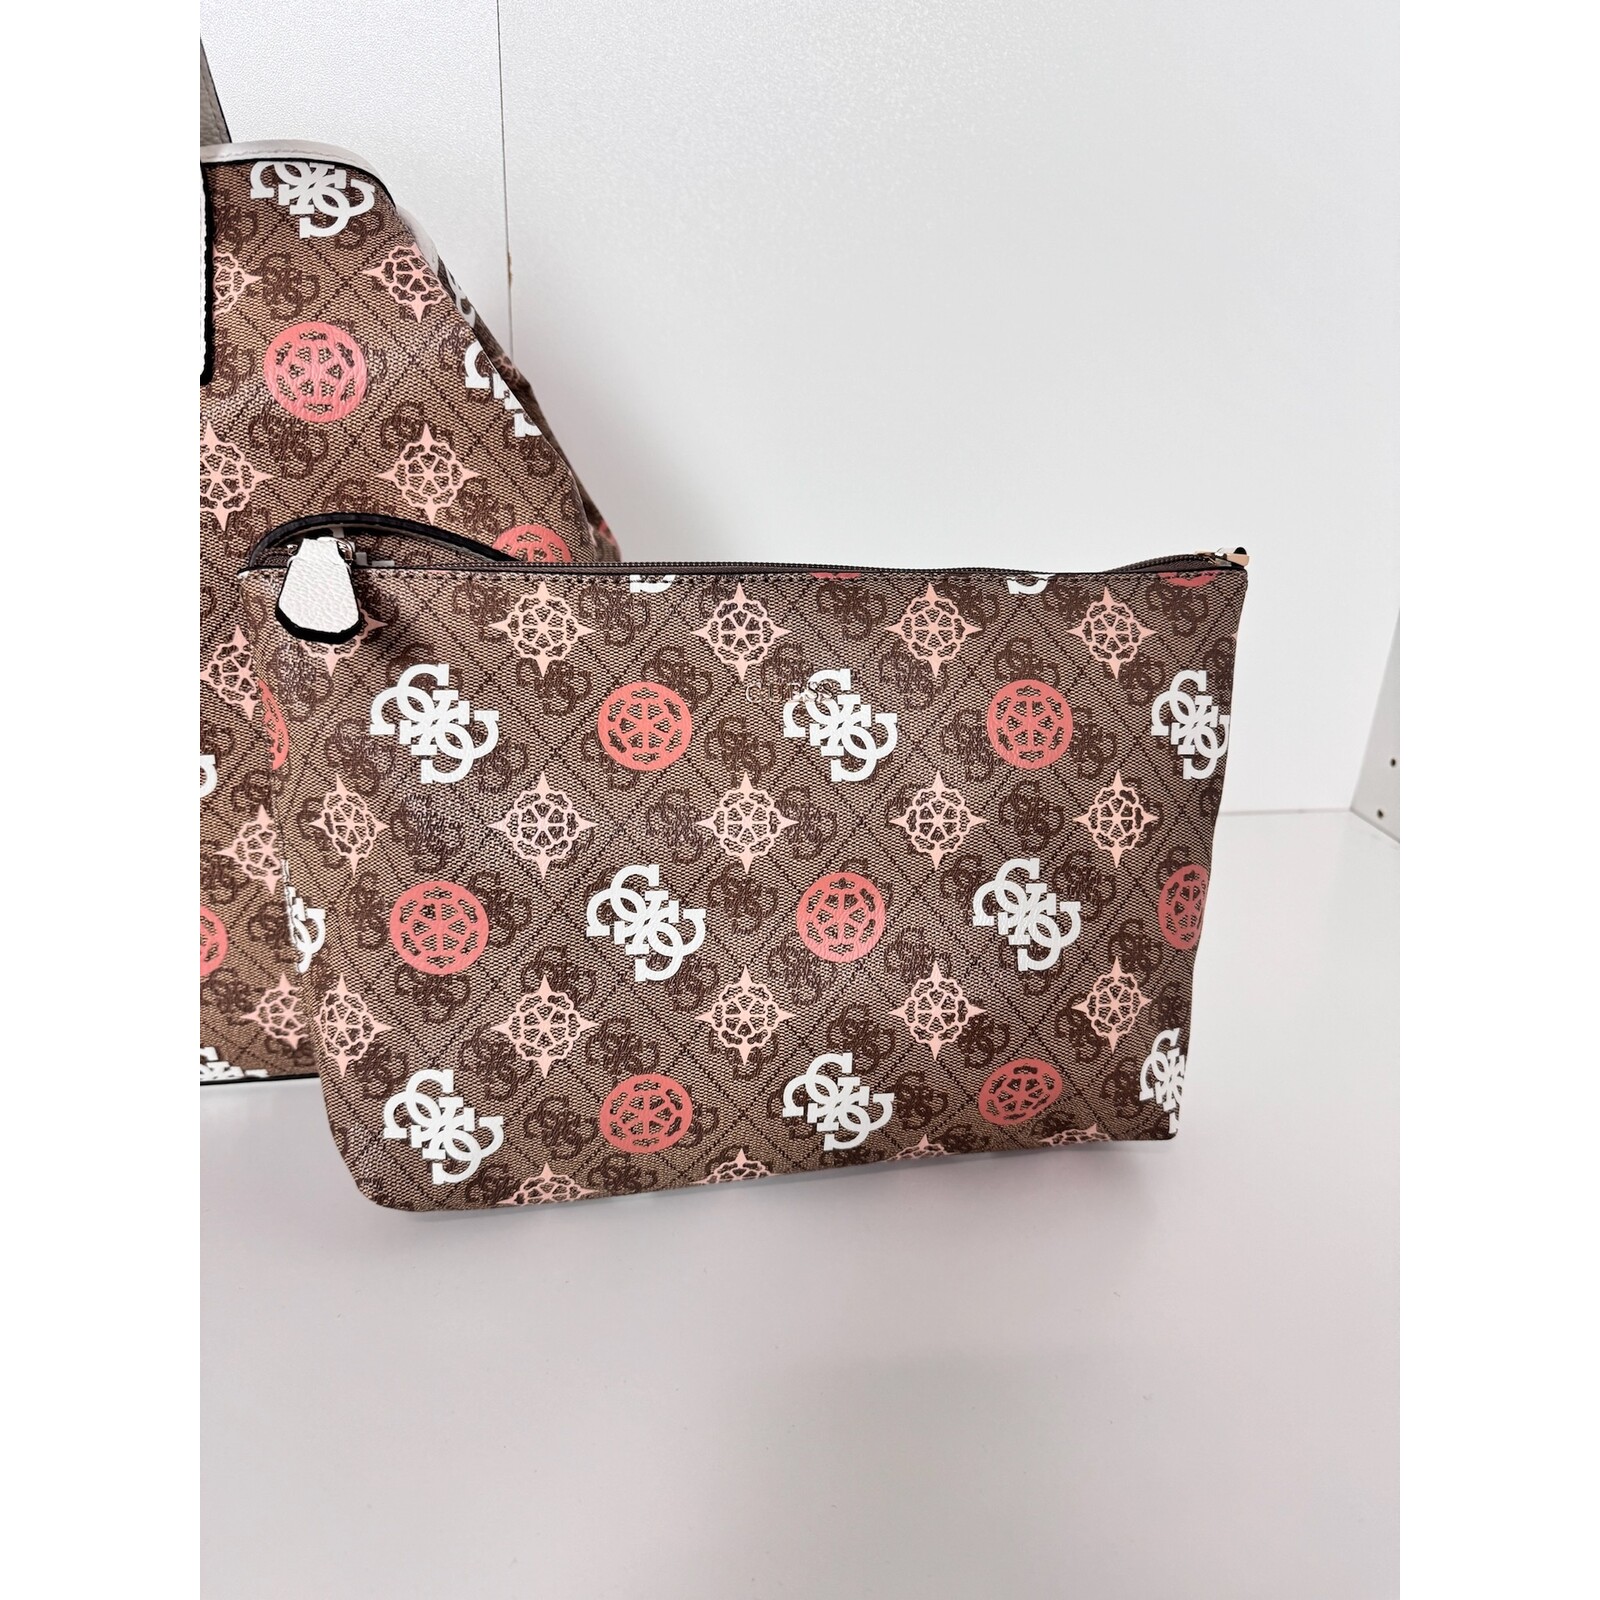 Guess 2 in 1 Bag Vikky Latte Logo Guess 825